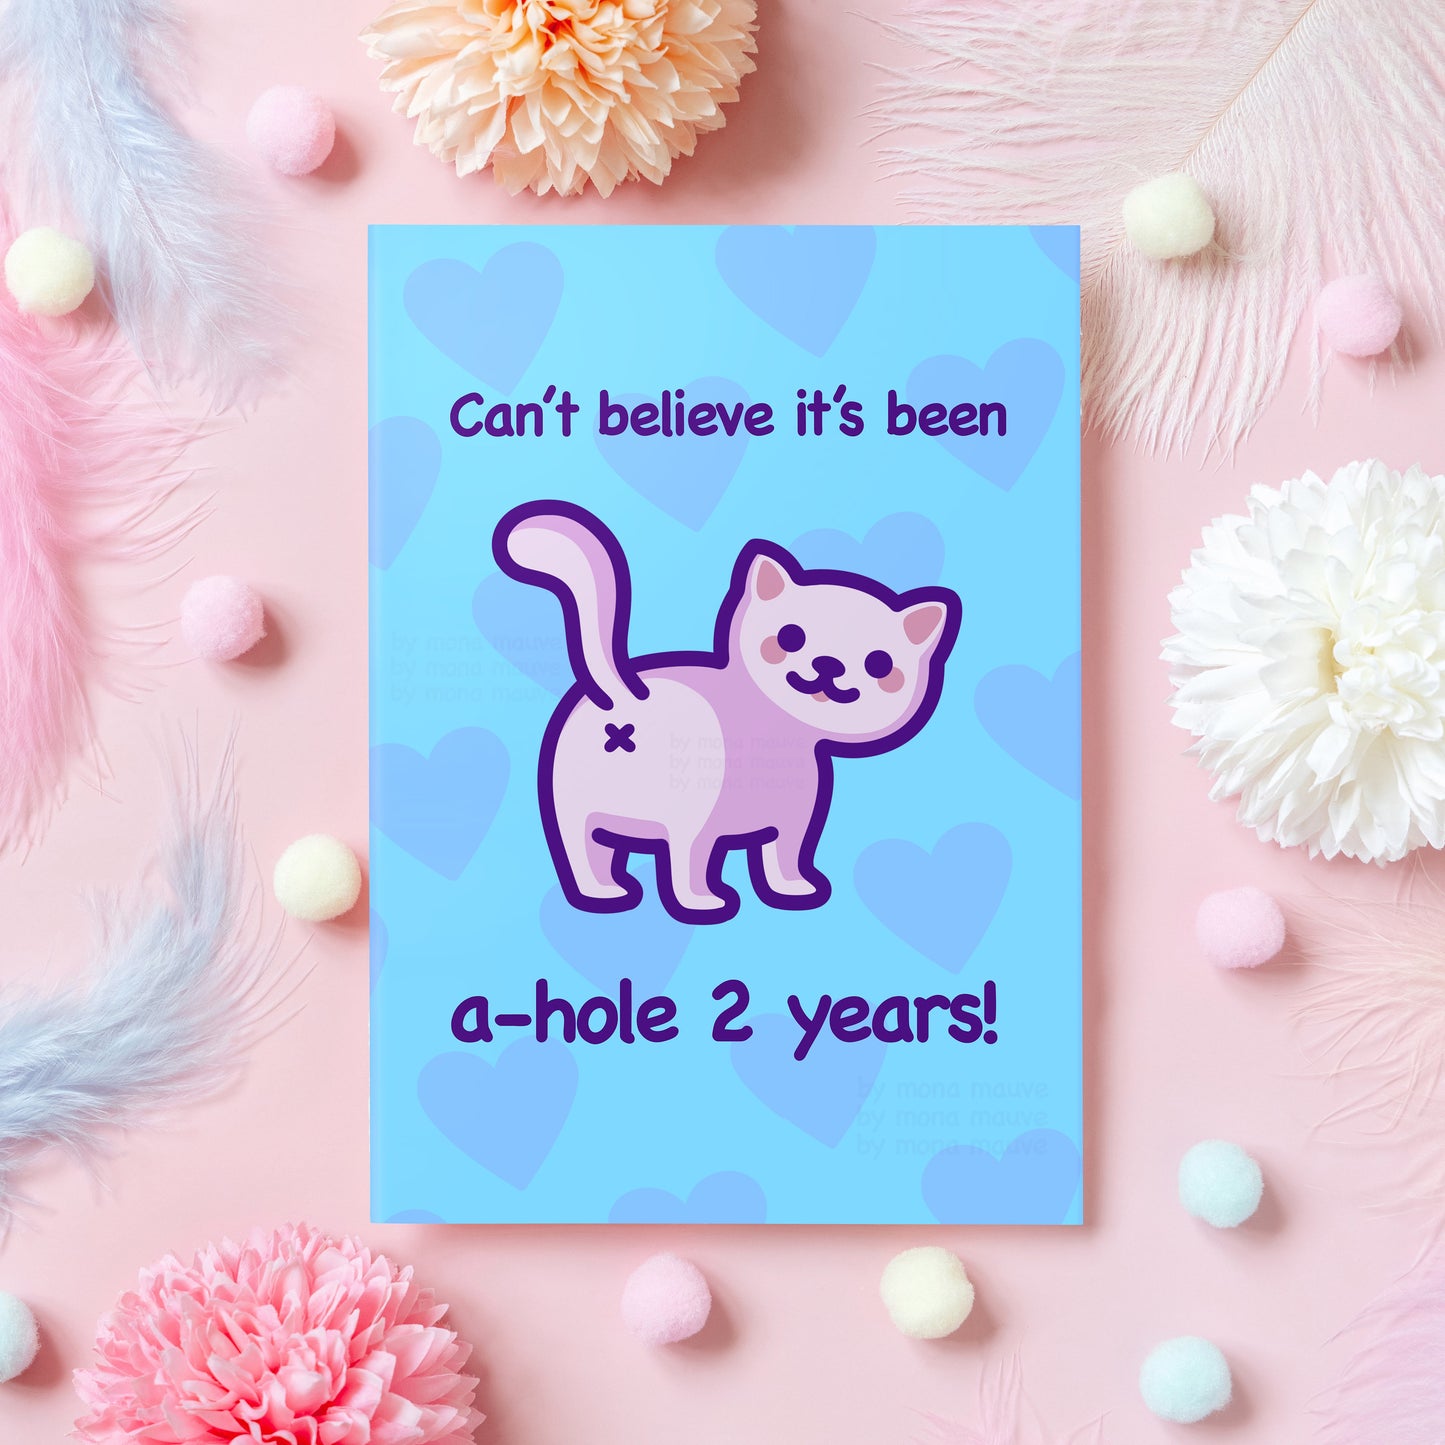 2 year anniversary greeting card with a funny illustration of a white cat with his butt facing the viewer. The card reads: "Can't believe it's been a-hole 2 years!"